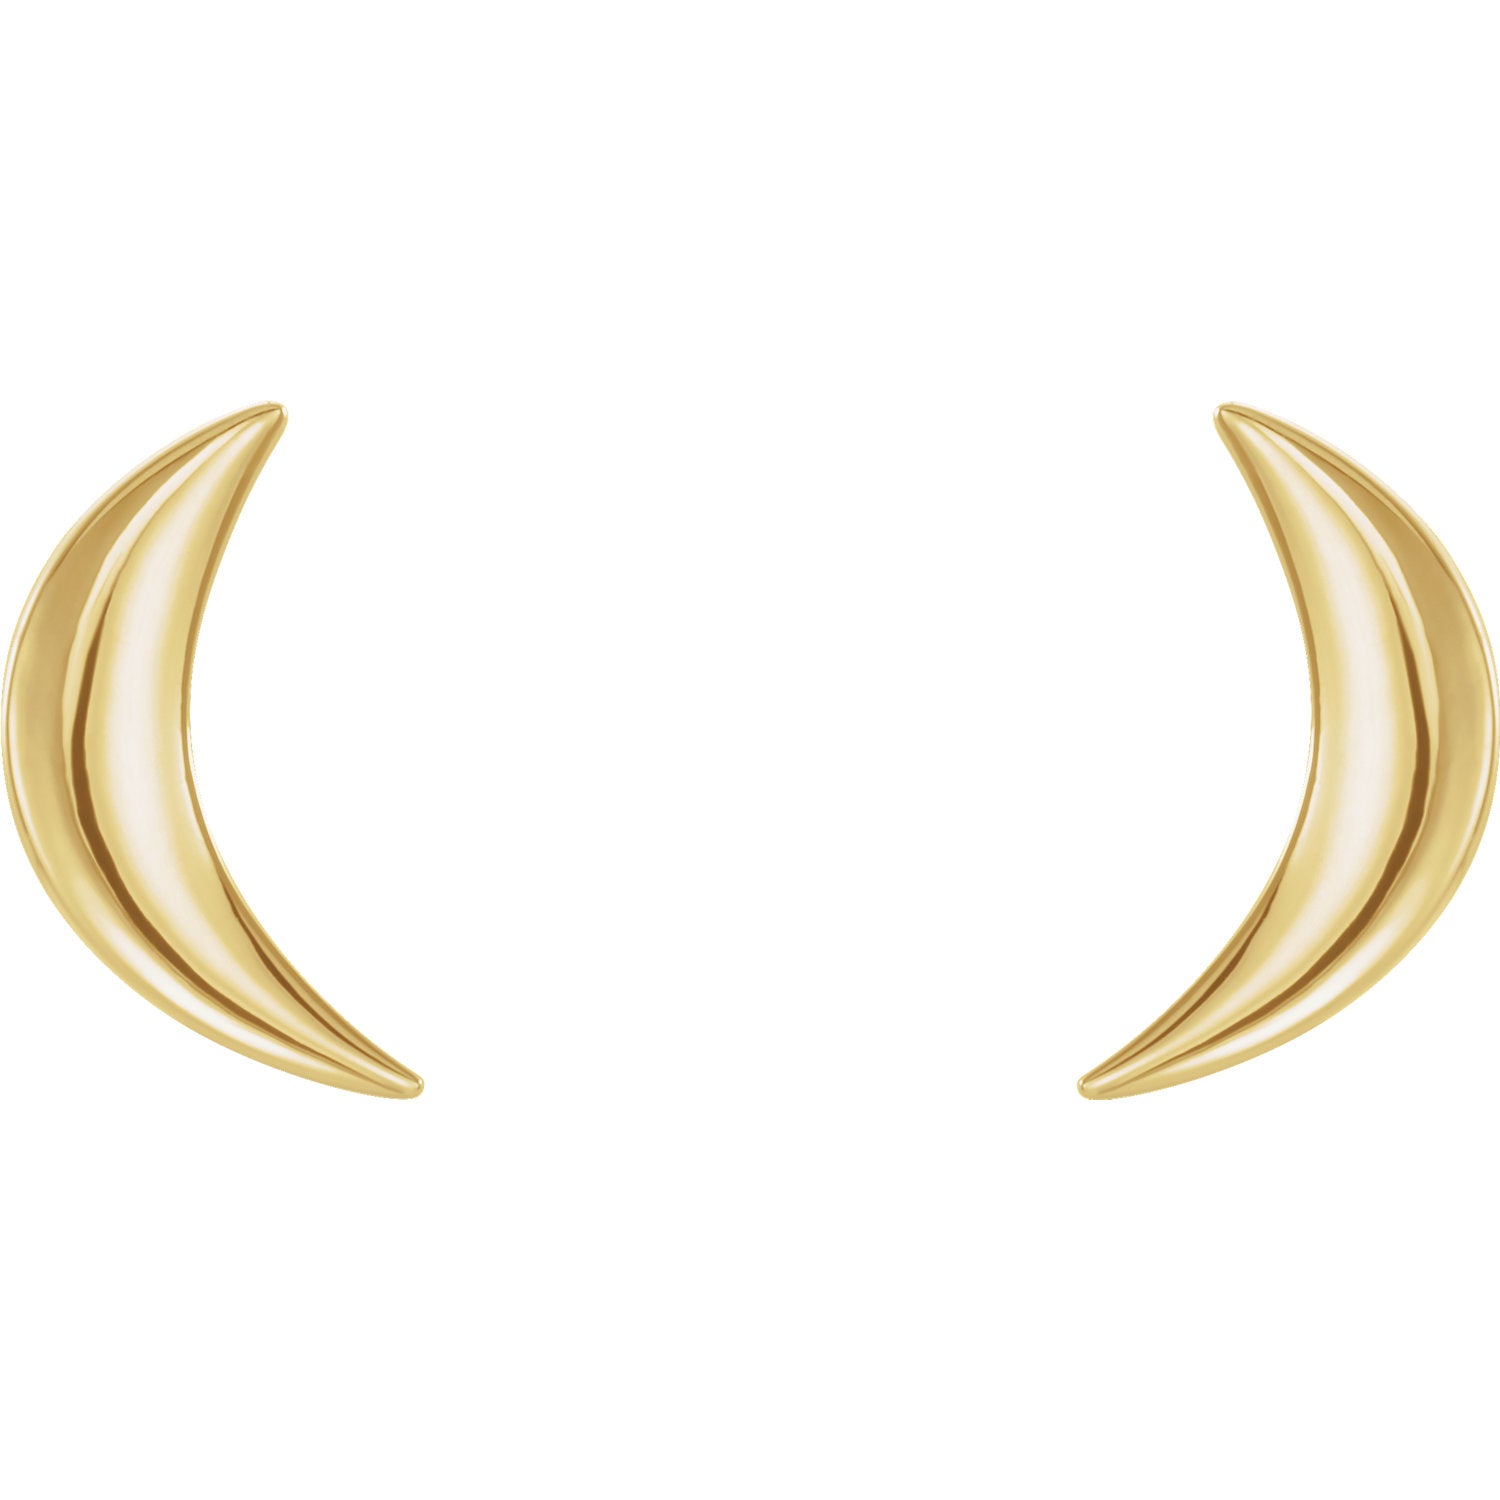 Crescent Moon 14k Gold Stud Earrings-Yellow Gold